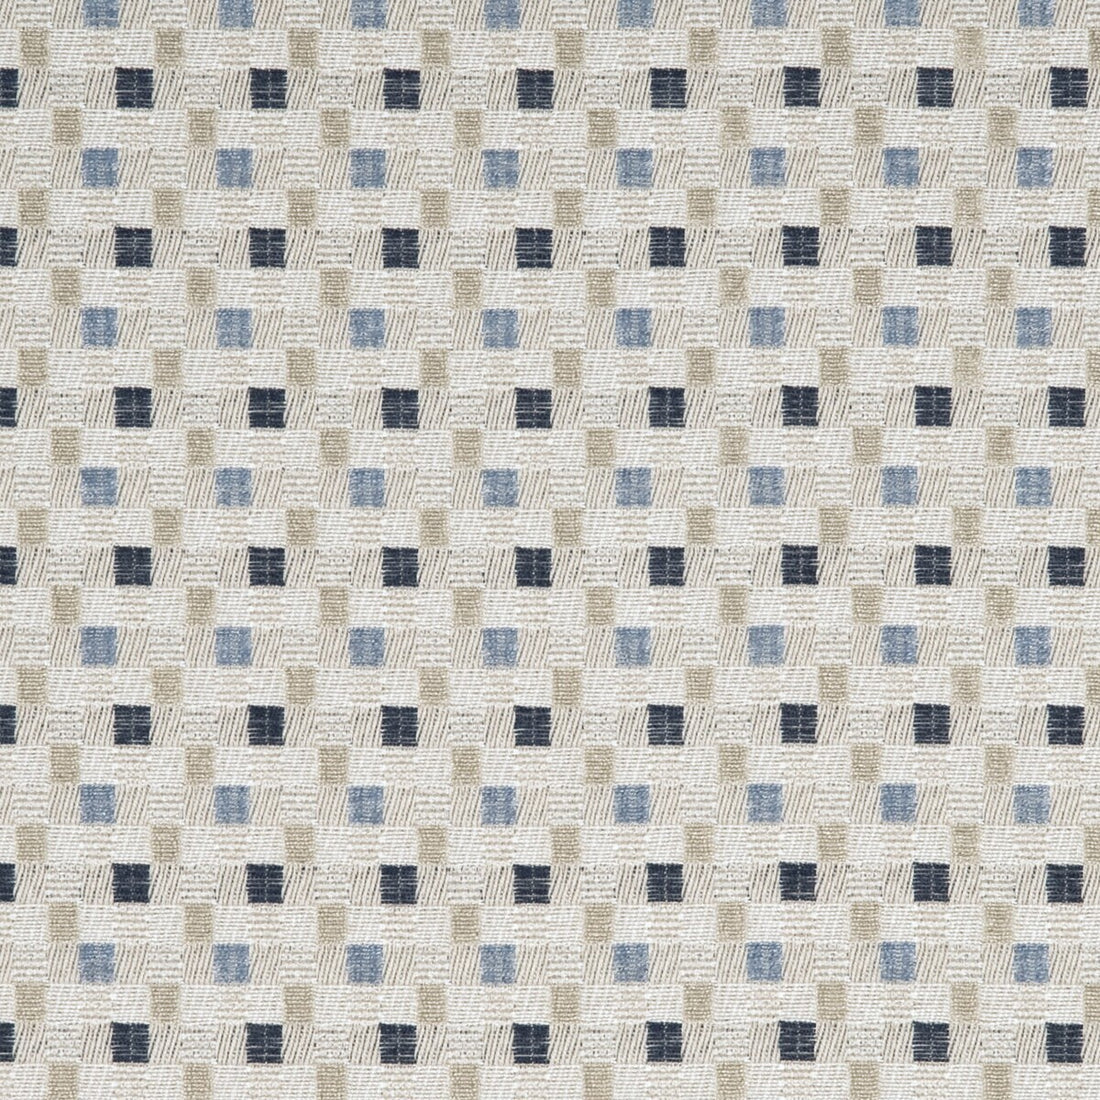 Skane fabric in ivory/stone/grey color - pattern PF50347.3.0 - by Baker Lifestyle in the Homes &amp; Gardens II collection